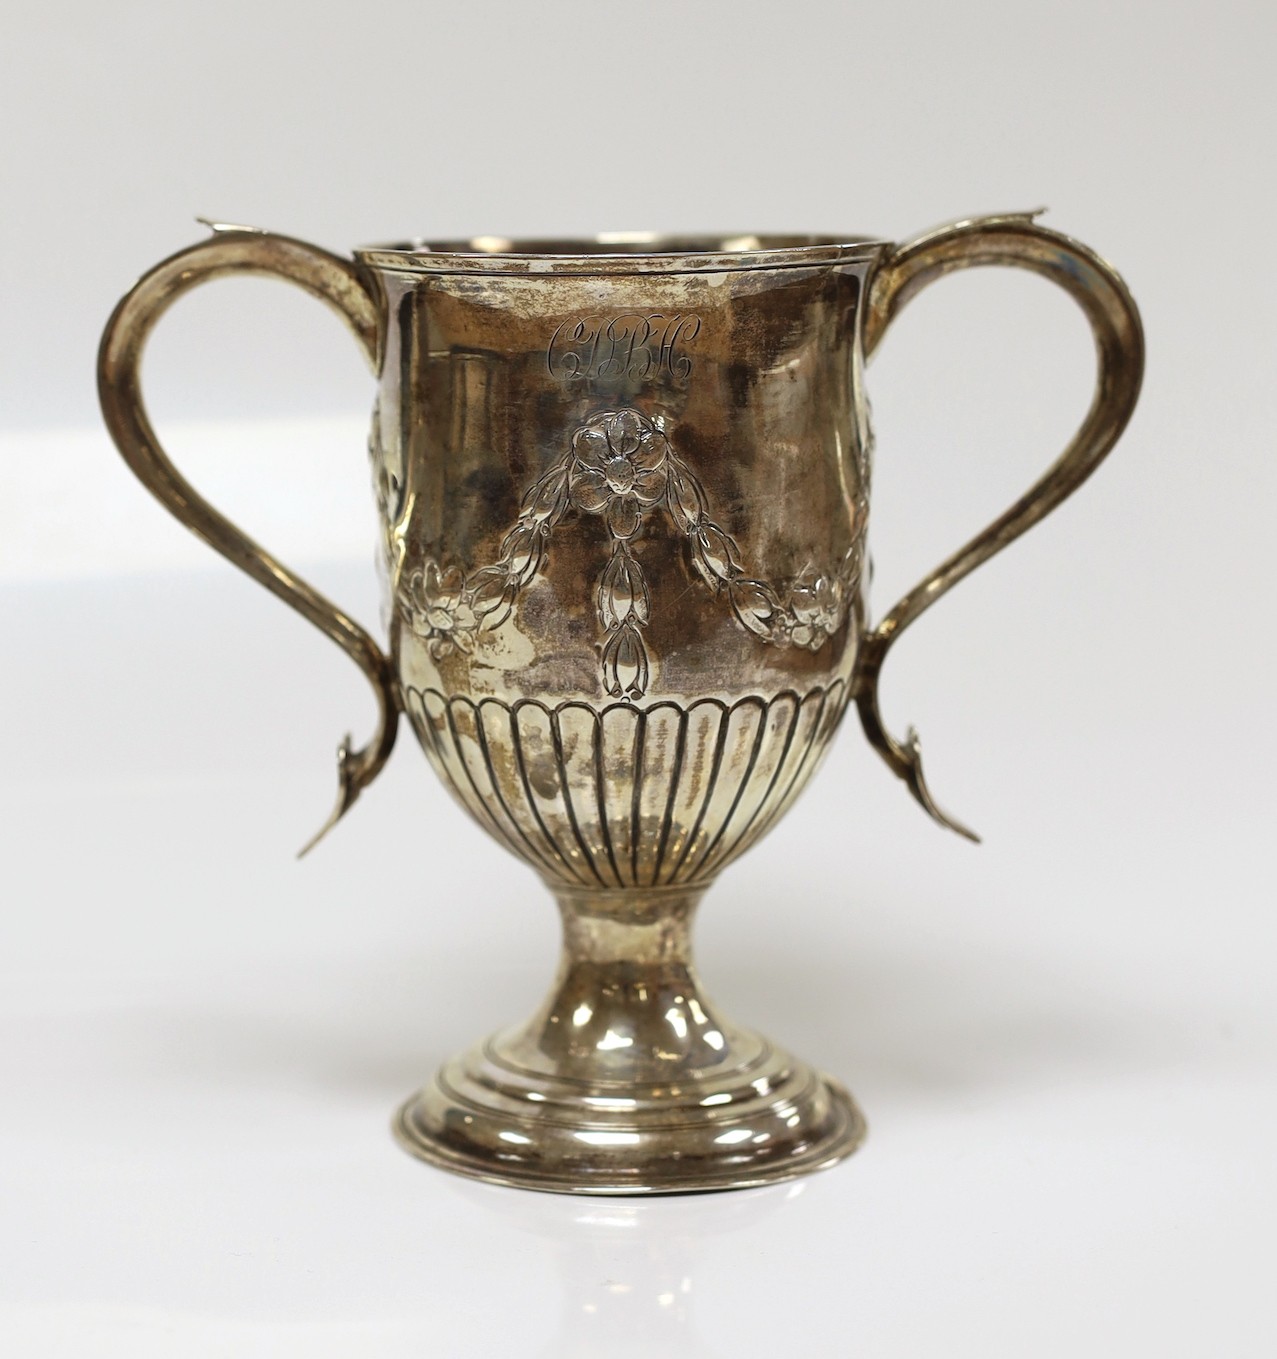 A George III silver two-handled cup, with later embossed decoration, Peter, Ann & William Bateman, London, 1803, height 15.1cm, 9.5oz.                                                                                      